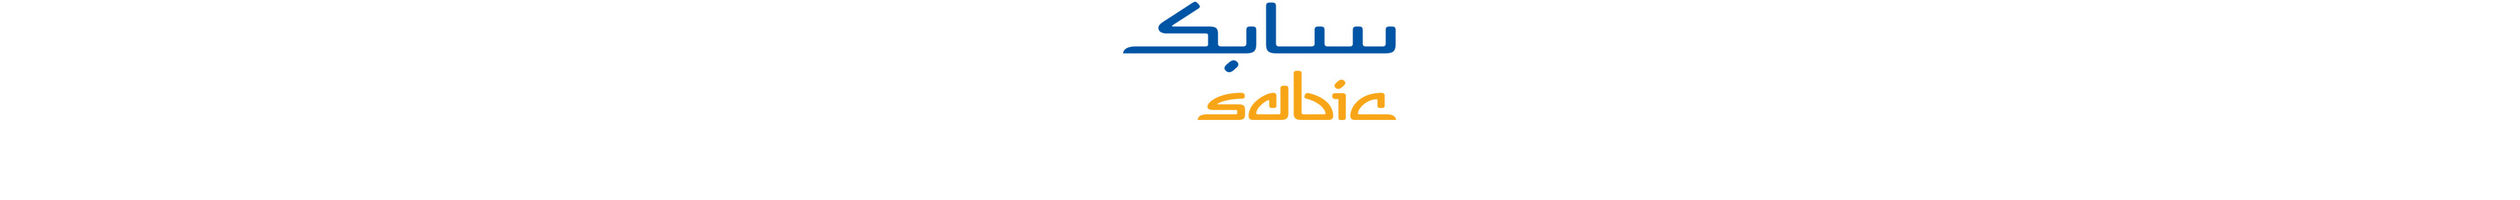 SABIC Logo - Home - Materials Technology Institute Inc